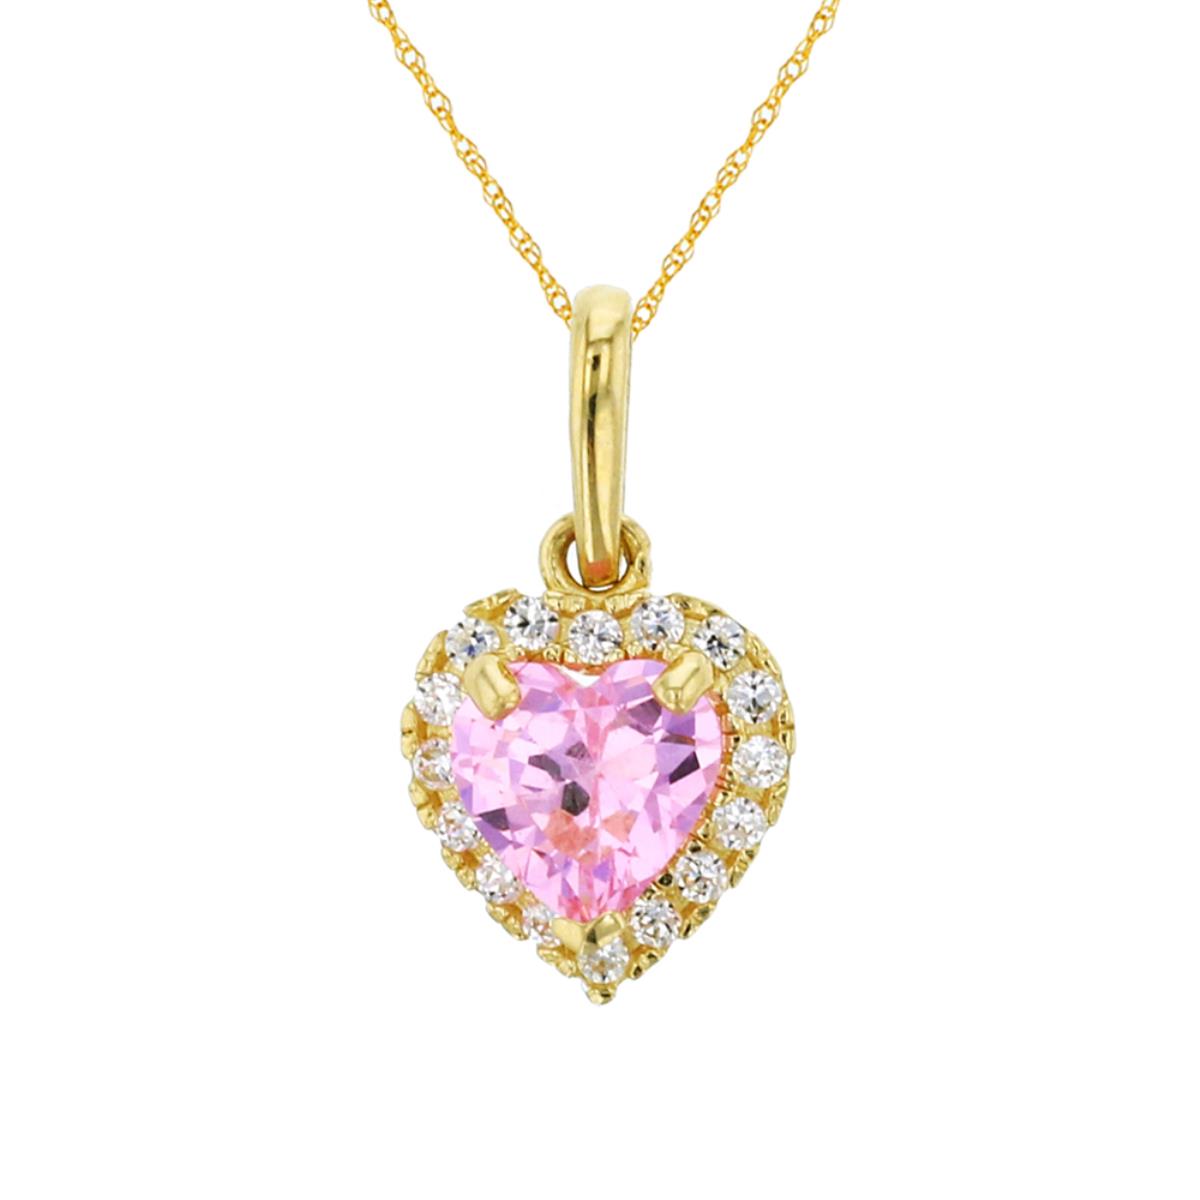 14K Yellow Gold 5mm Heart Cut Pink & CZ Halo Dangling 18" Rope Chain Necklace